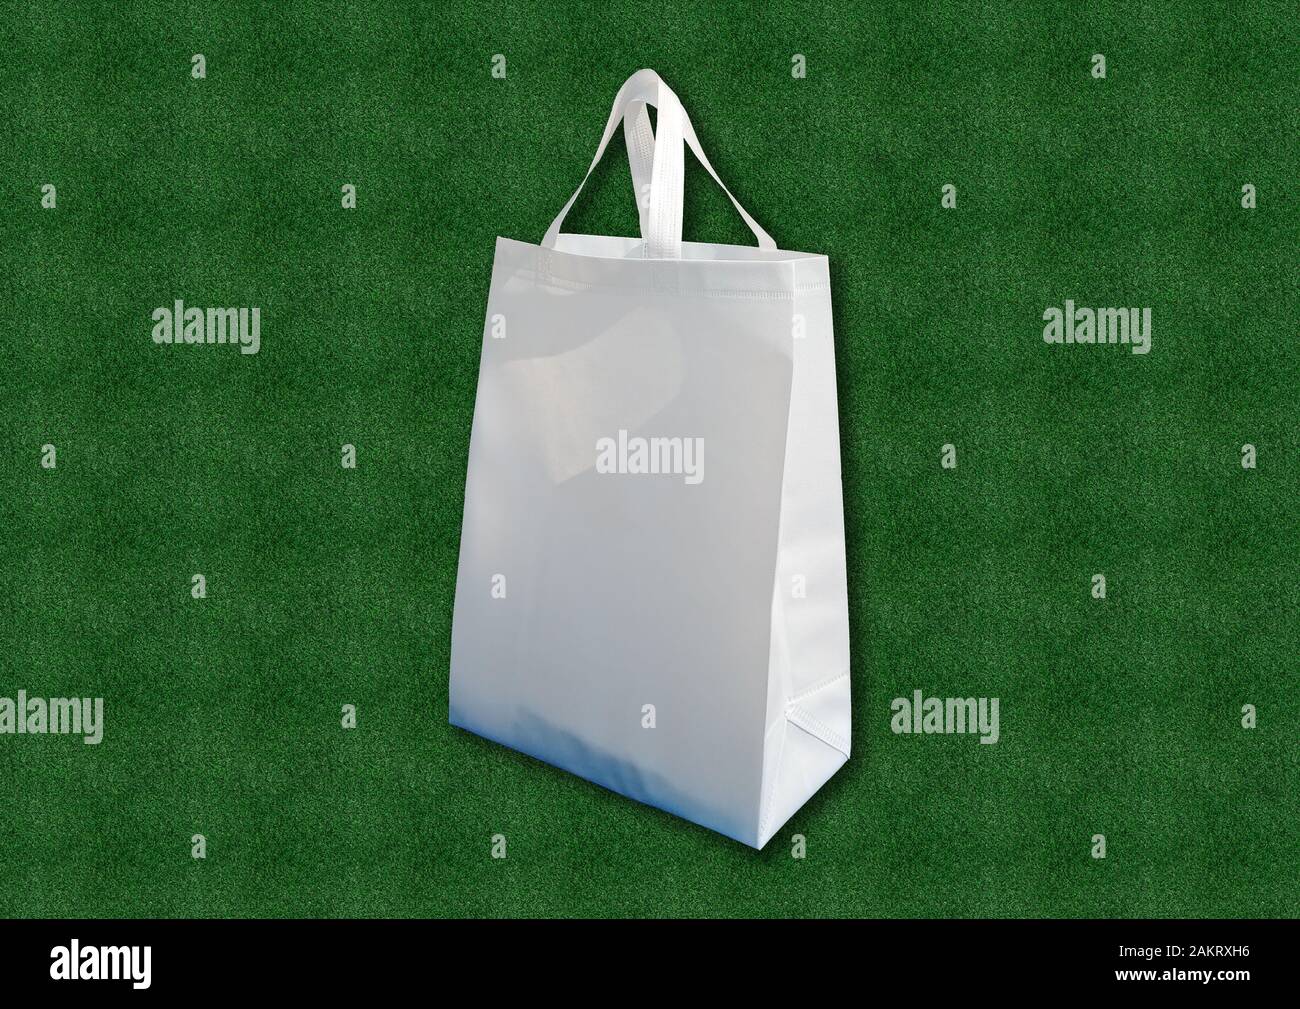 White fabric cloth Recyclable ECO Bag on Green Grass background. Replacement plastic bag. Save Earth ecology. Non Woven Bag Good for the Environment. Stock Photo